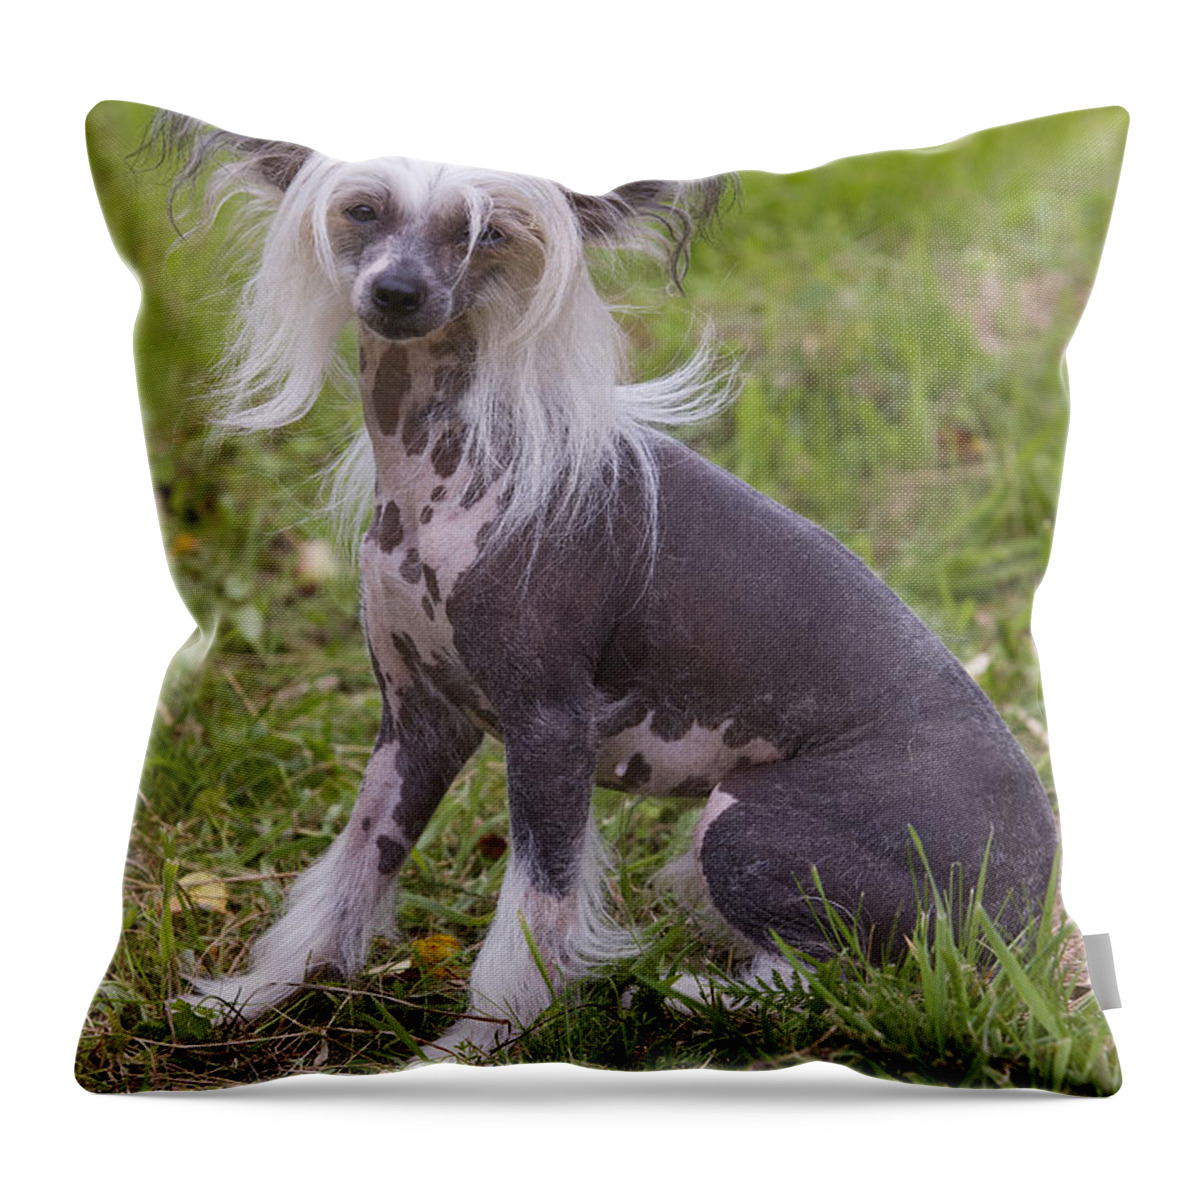 Chinese Crested Throw Pillow featuring the photograph Chinese Crested Dog by Jean-Michel Labat